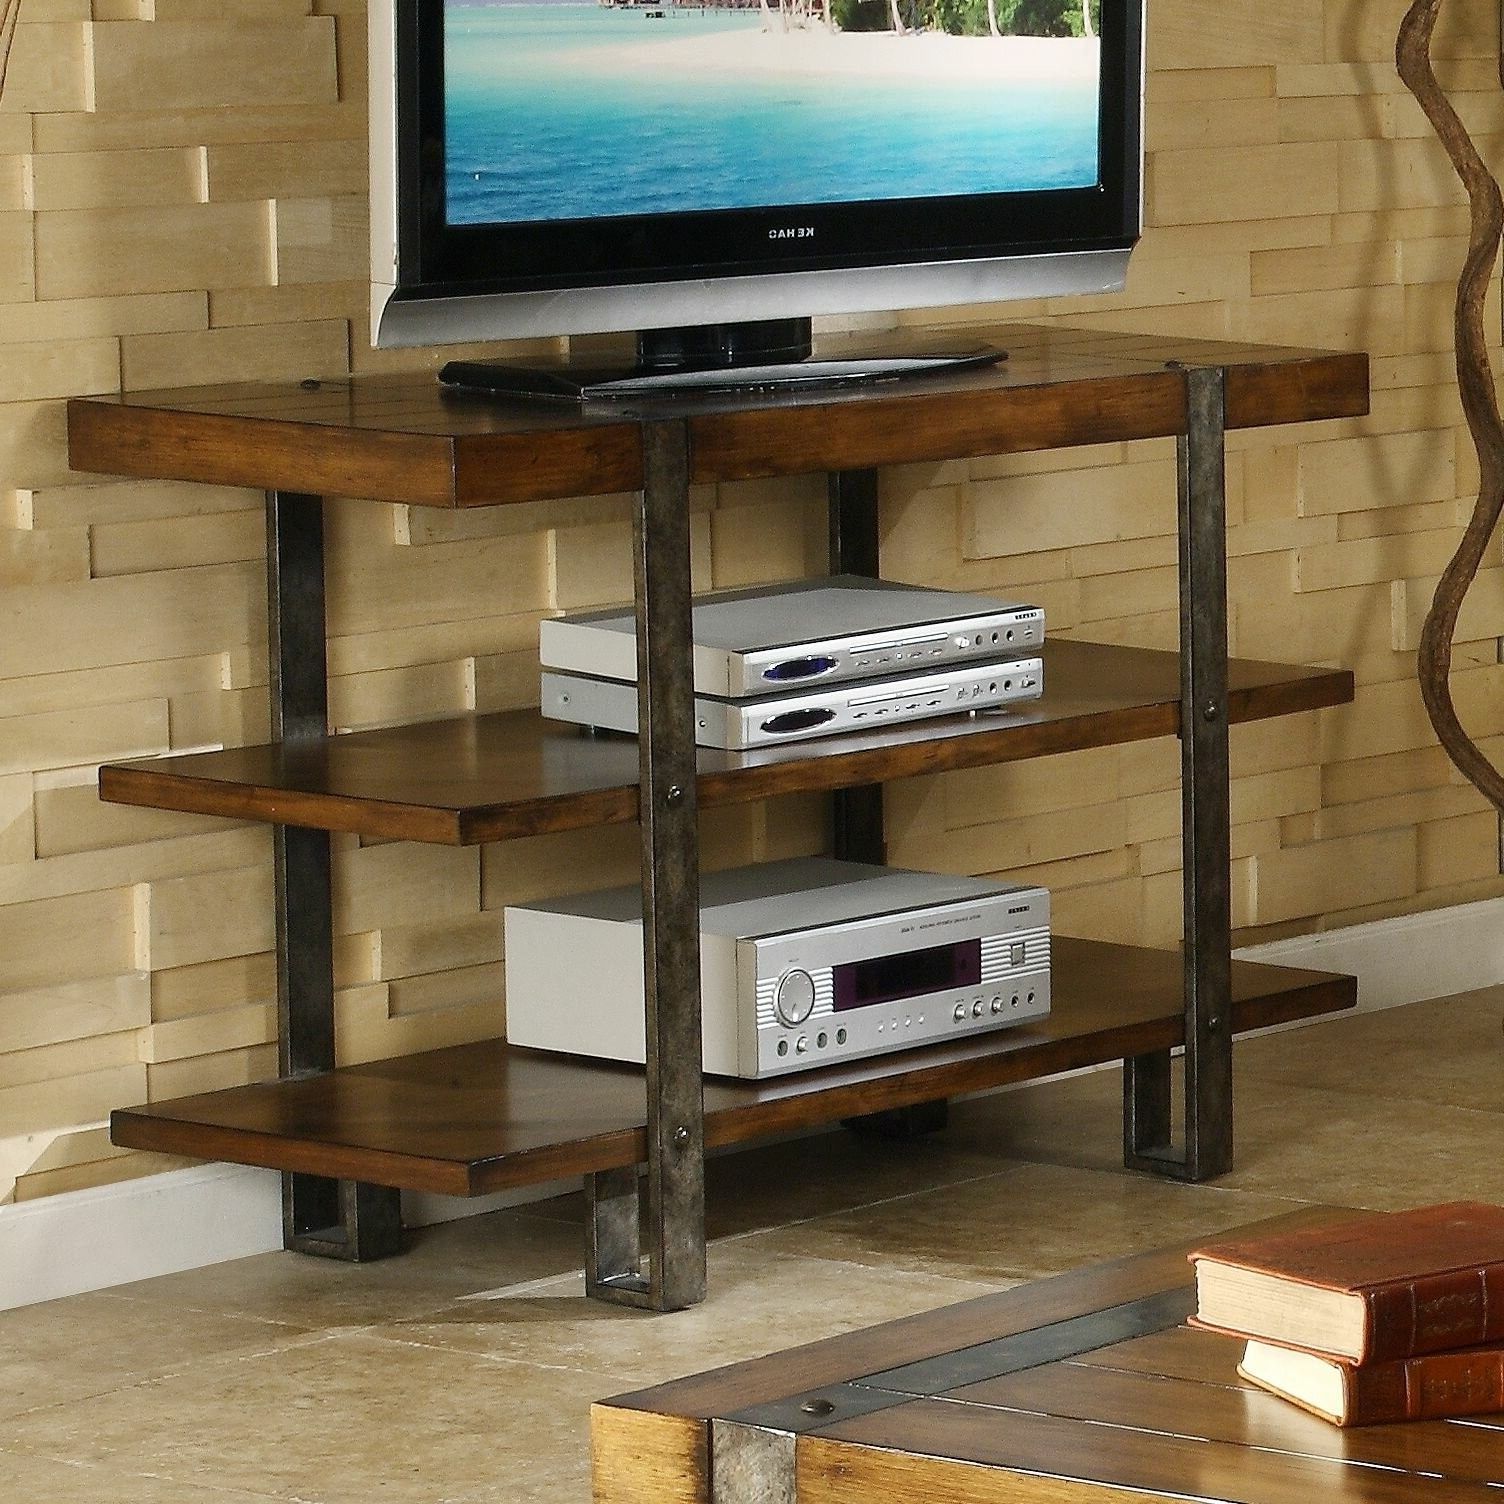 Iron Tv Stands With Regard To Latest Metal And Wood Tv Stands – Ideas On Foter (View 6 of 10)